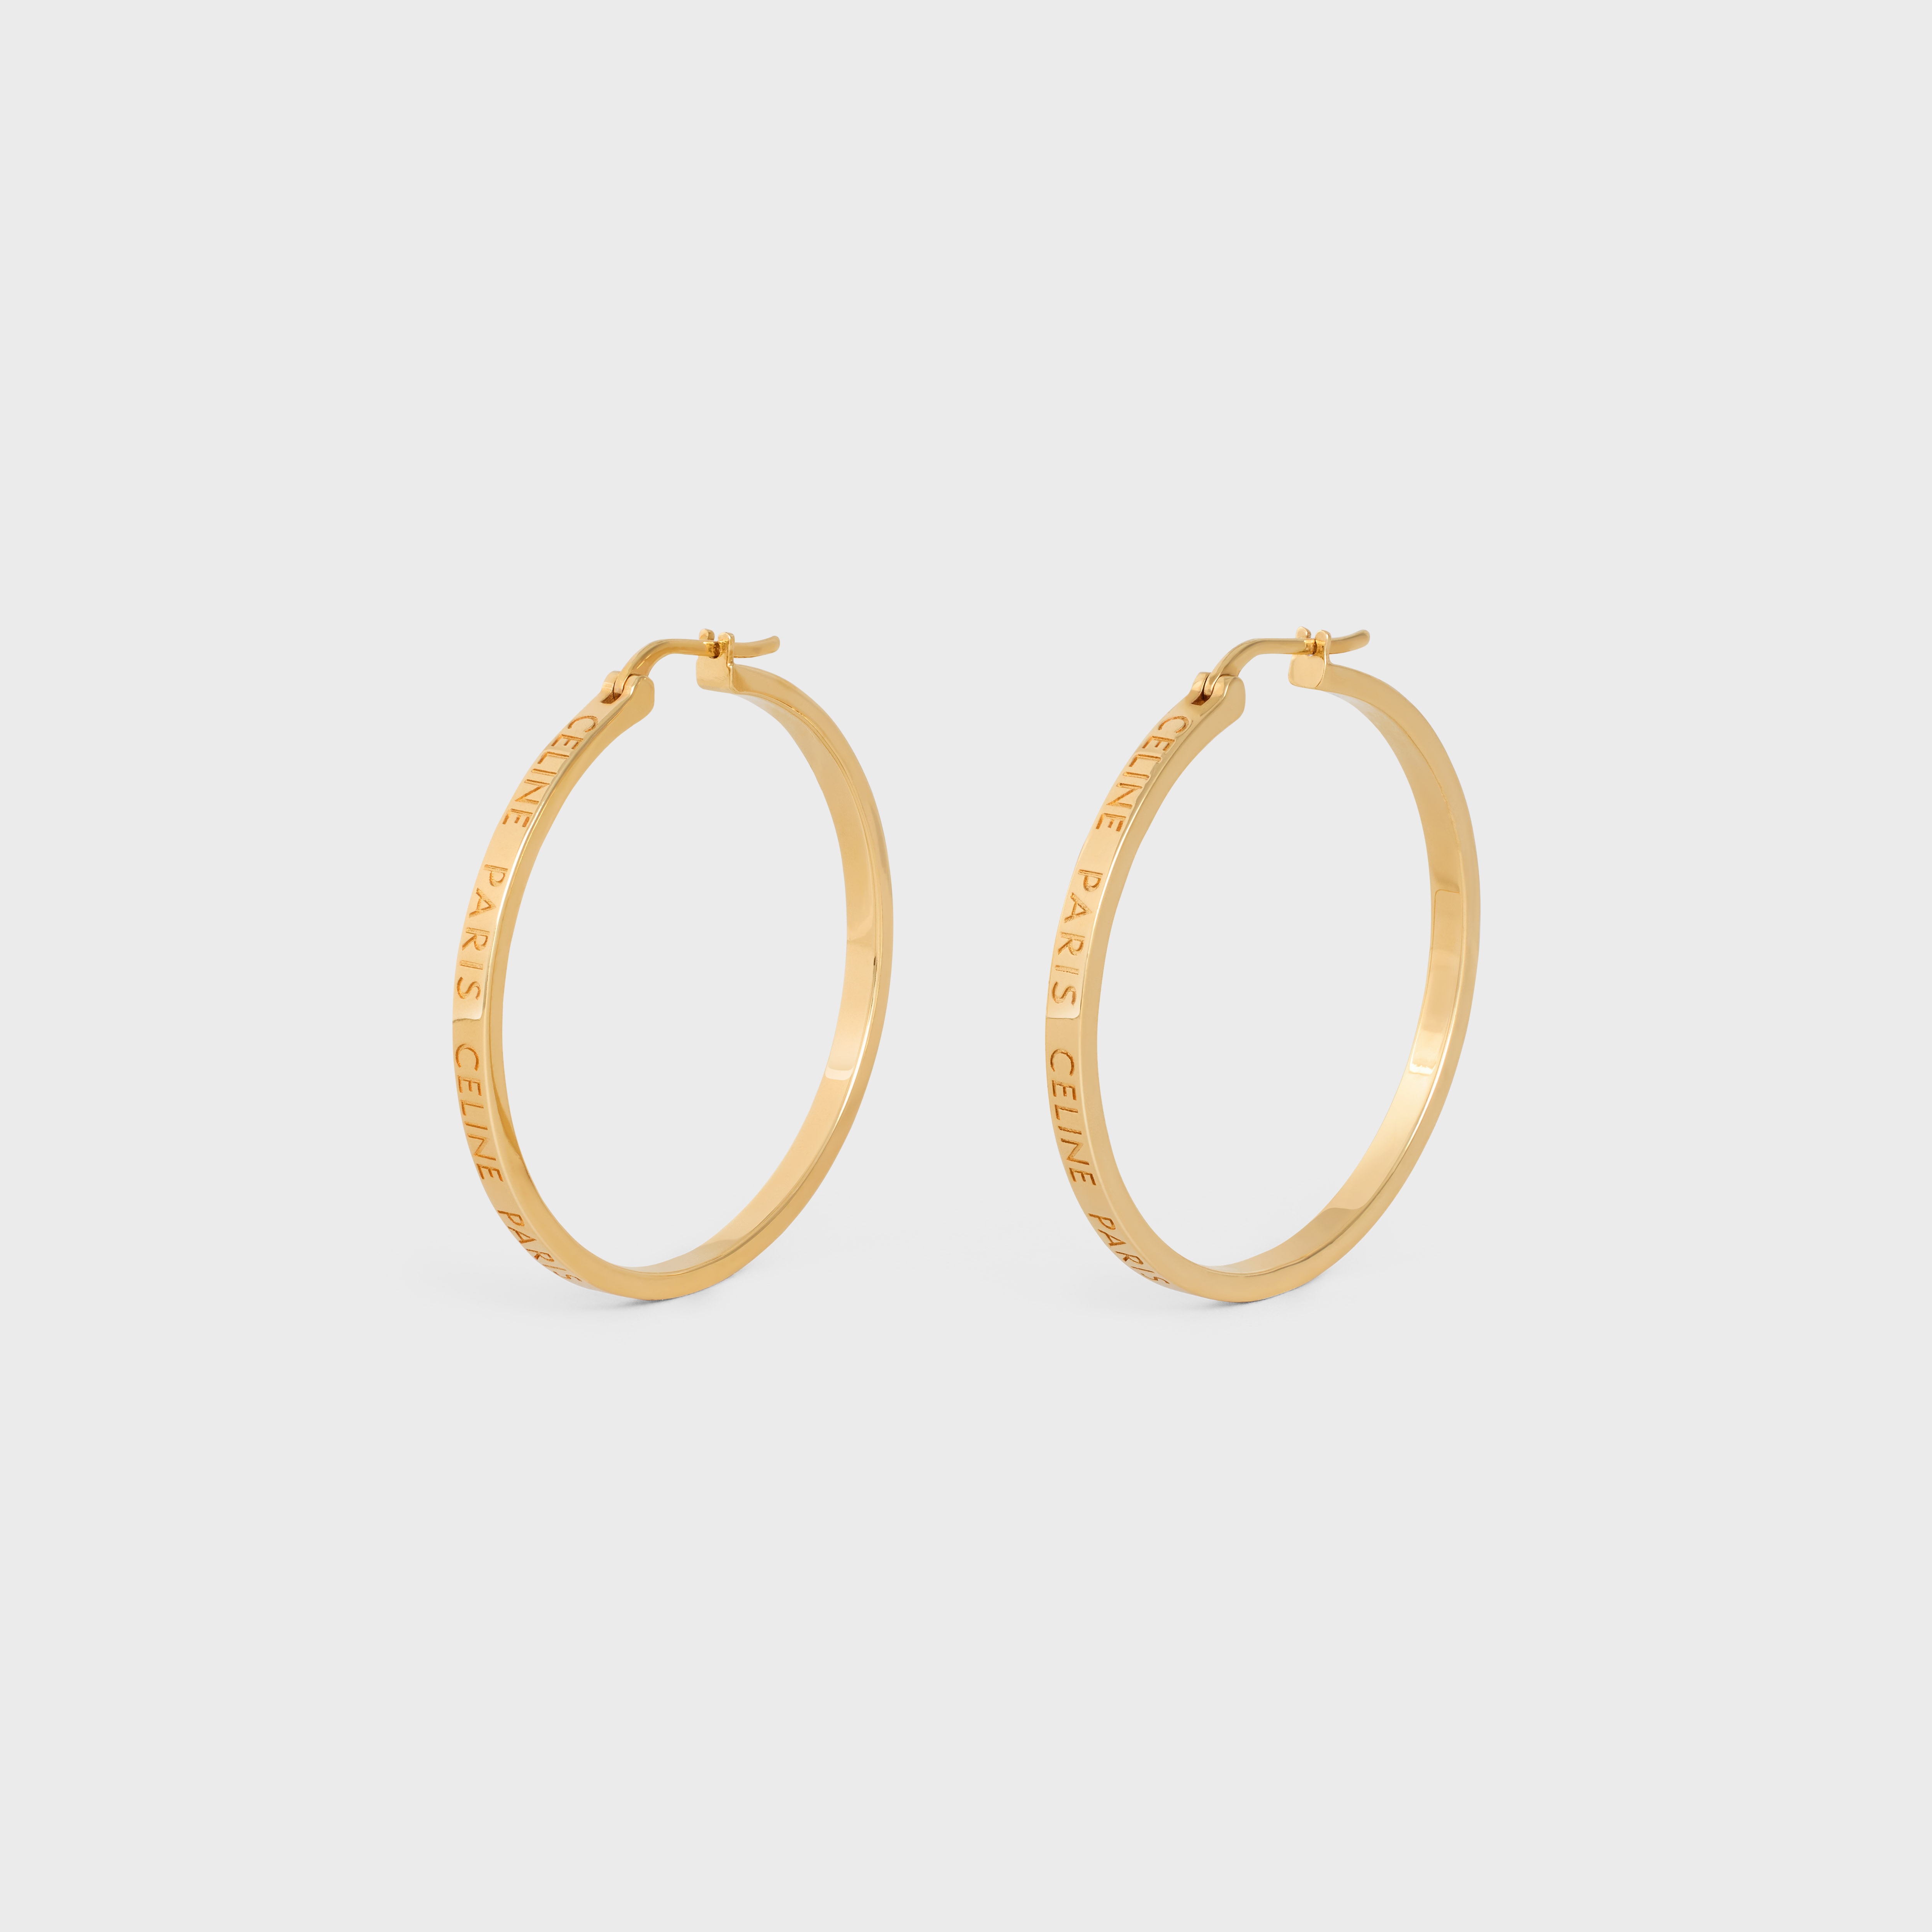 Celine Paris Large Hoops in Brass with Gold Finish - 2